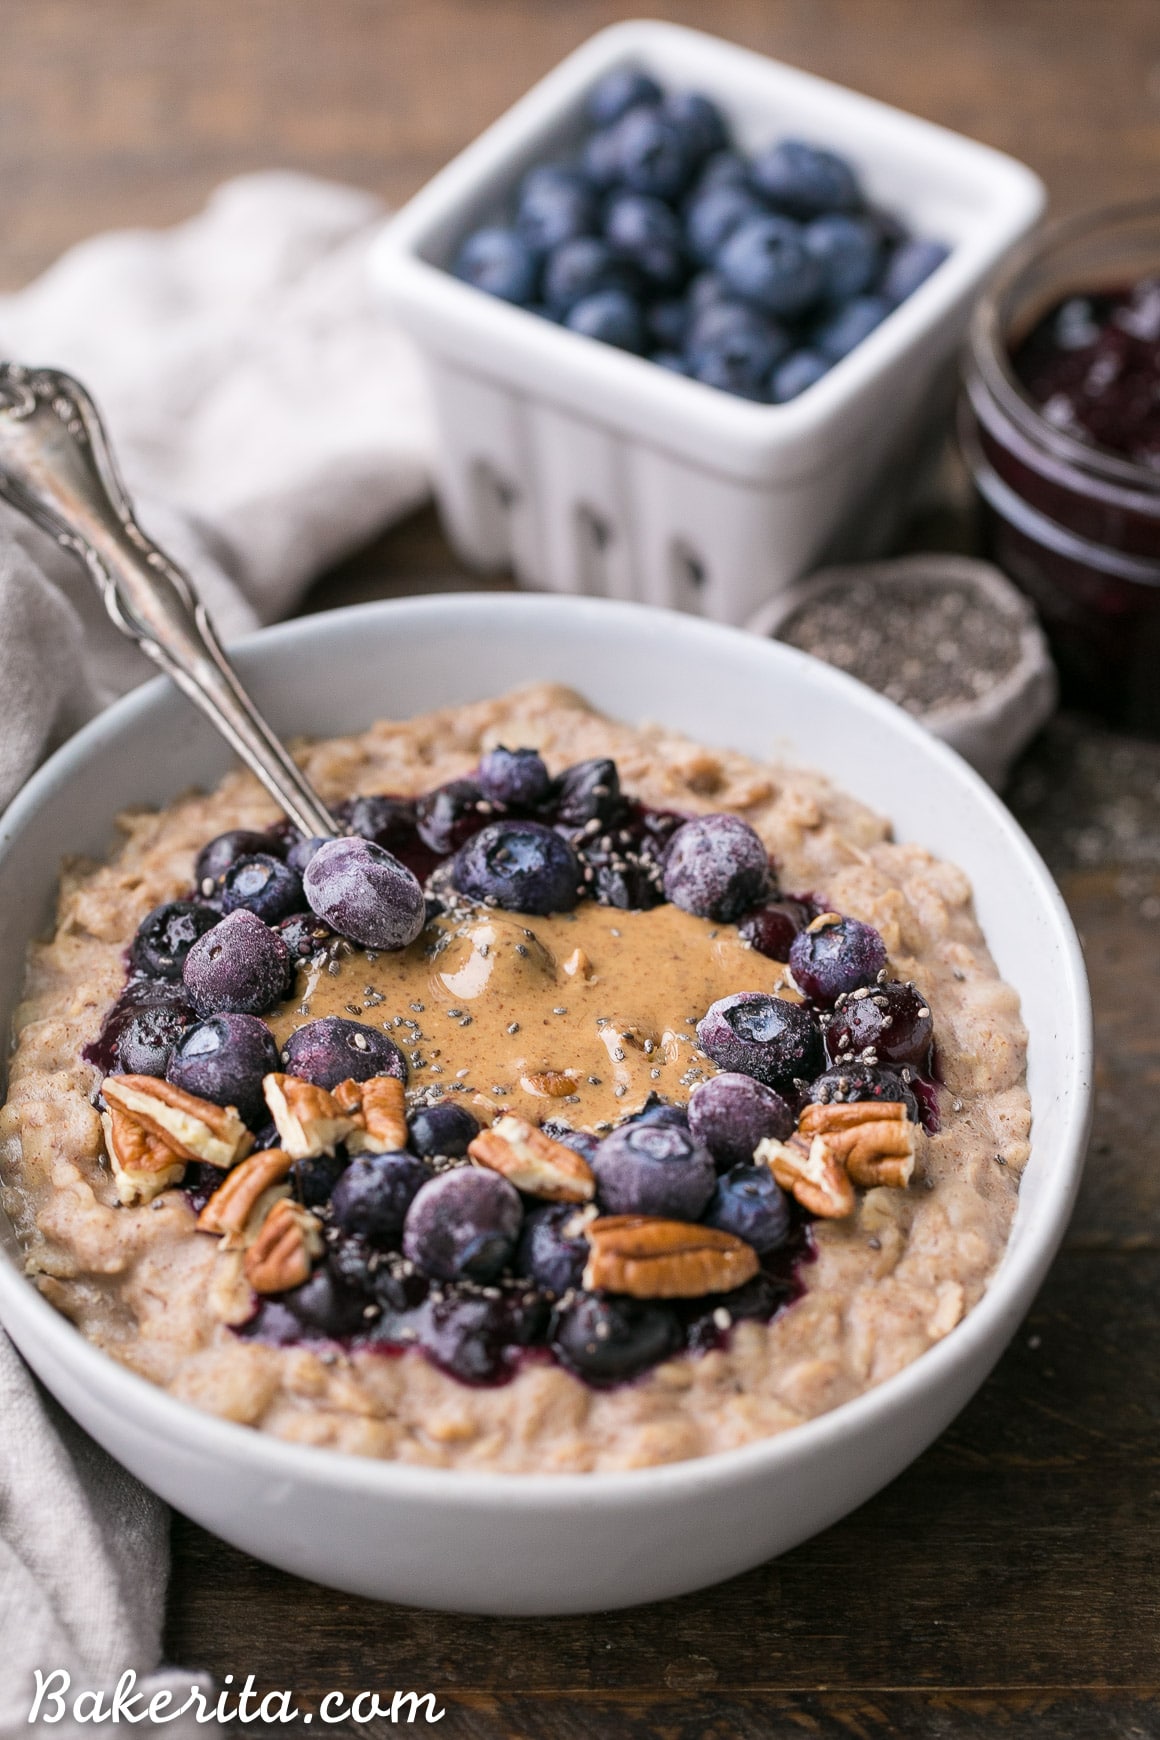 This simple Blueberry Muffin Oatmeal is sweetened with a banana, spiced with cinnamon and topped with an easy blueberry compote! Top with all your favorite toppings for a delicious, healthy + filling breakfast that is far from boring. 